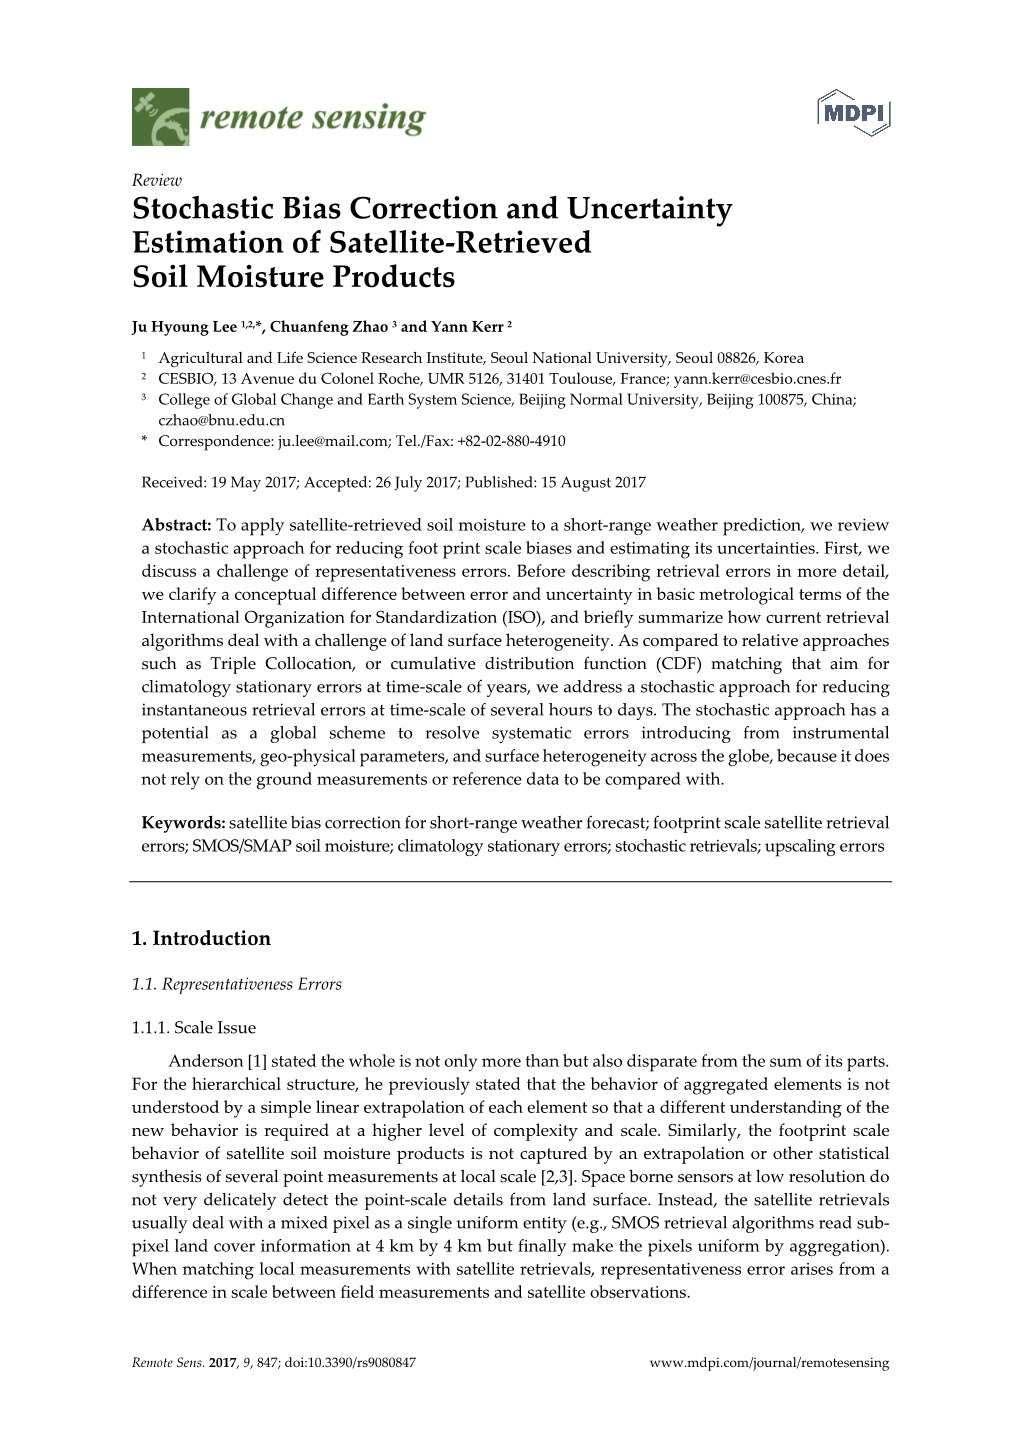 Stochastic Bias Correction and Uncertainty Estimation of Satellite-Retrieved Soil Moisture Products